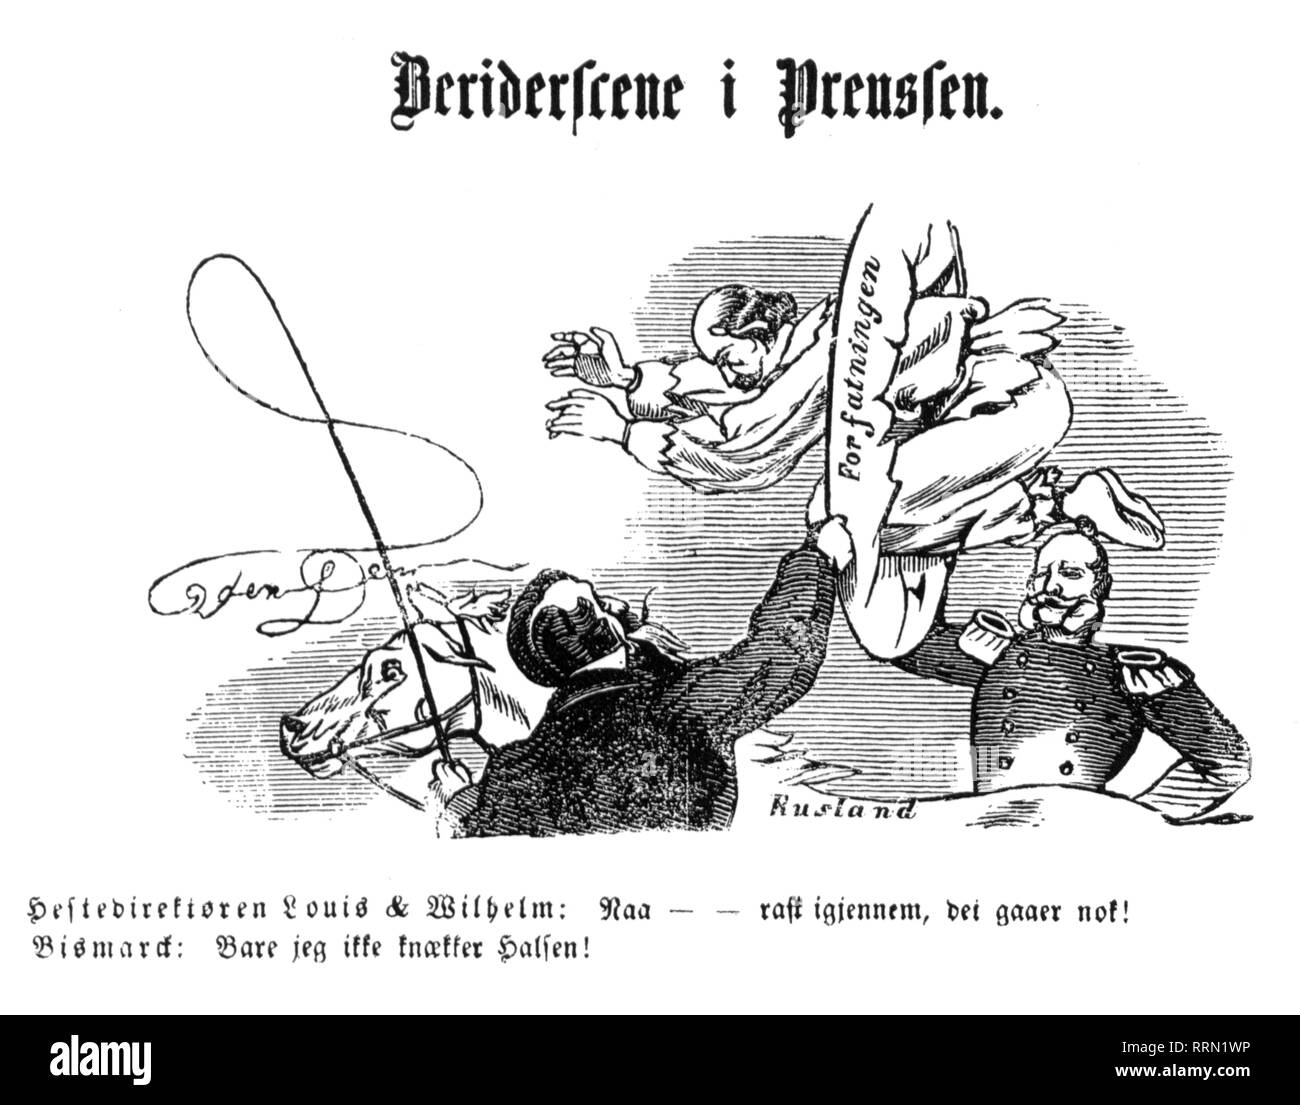 Bismarck, Otto von, 1.4.1815 - 30.7.1898, German politician, caricature, 'Circus Riding in Prussia', drawing, Copenhagen, 14.2.1863, Additional-Rights-Clearance-Info-Not-Available Stock Photo